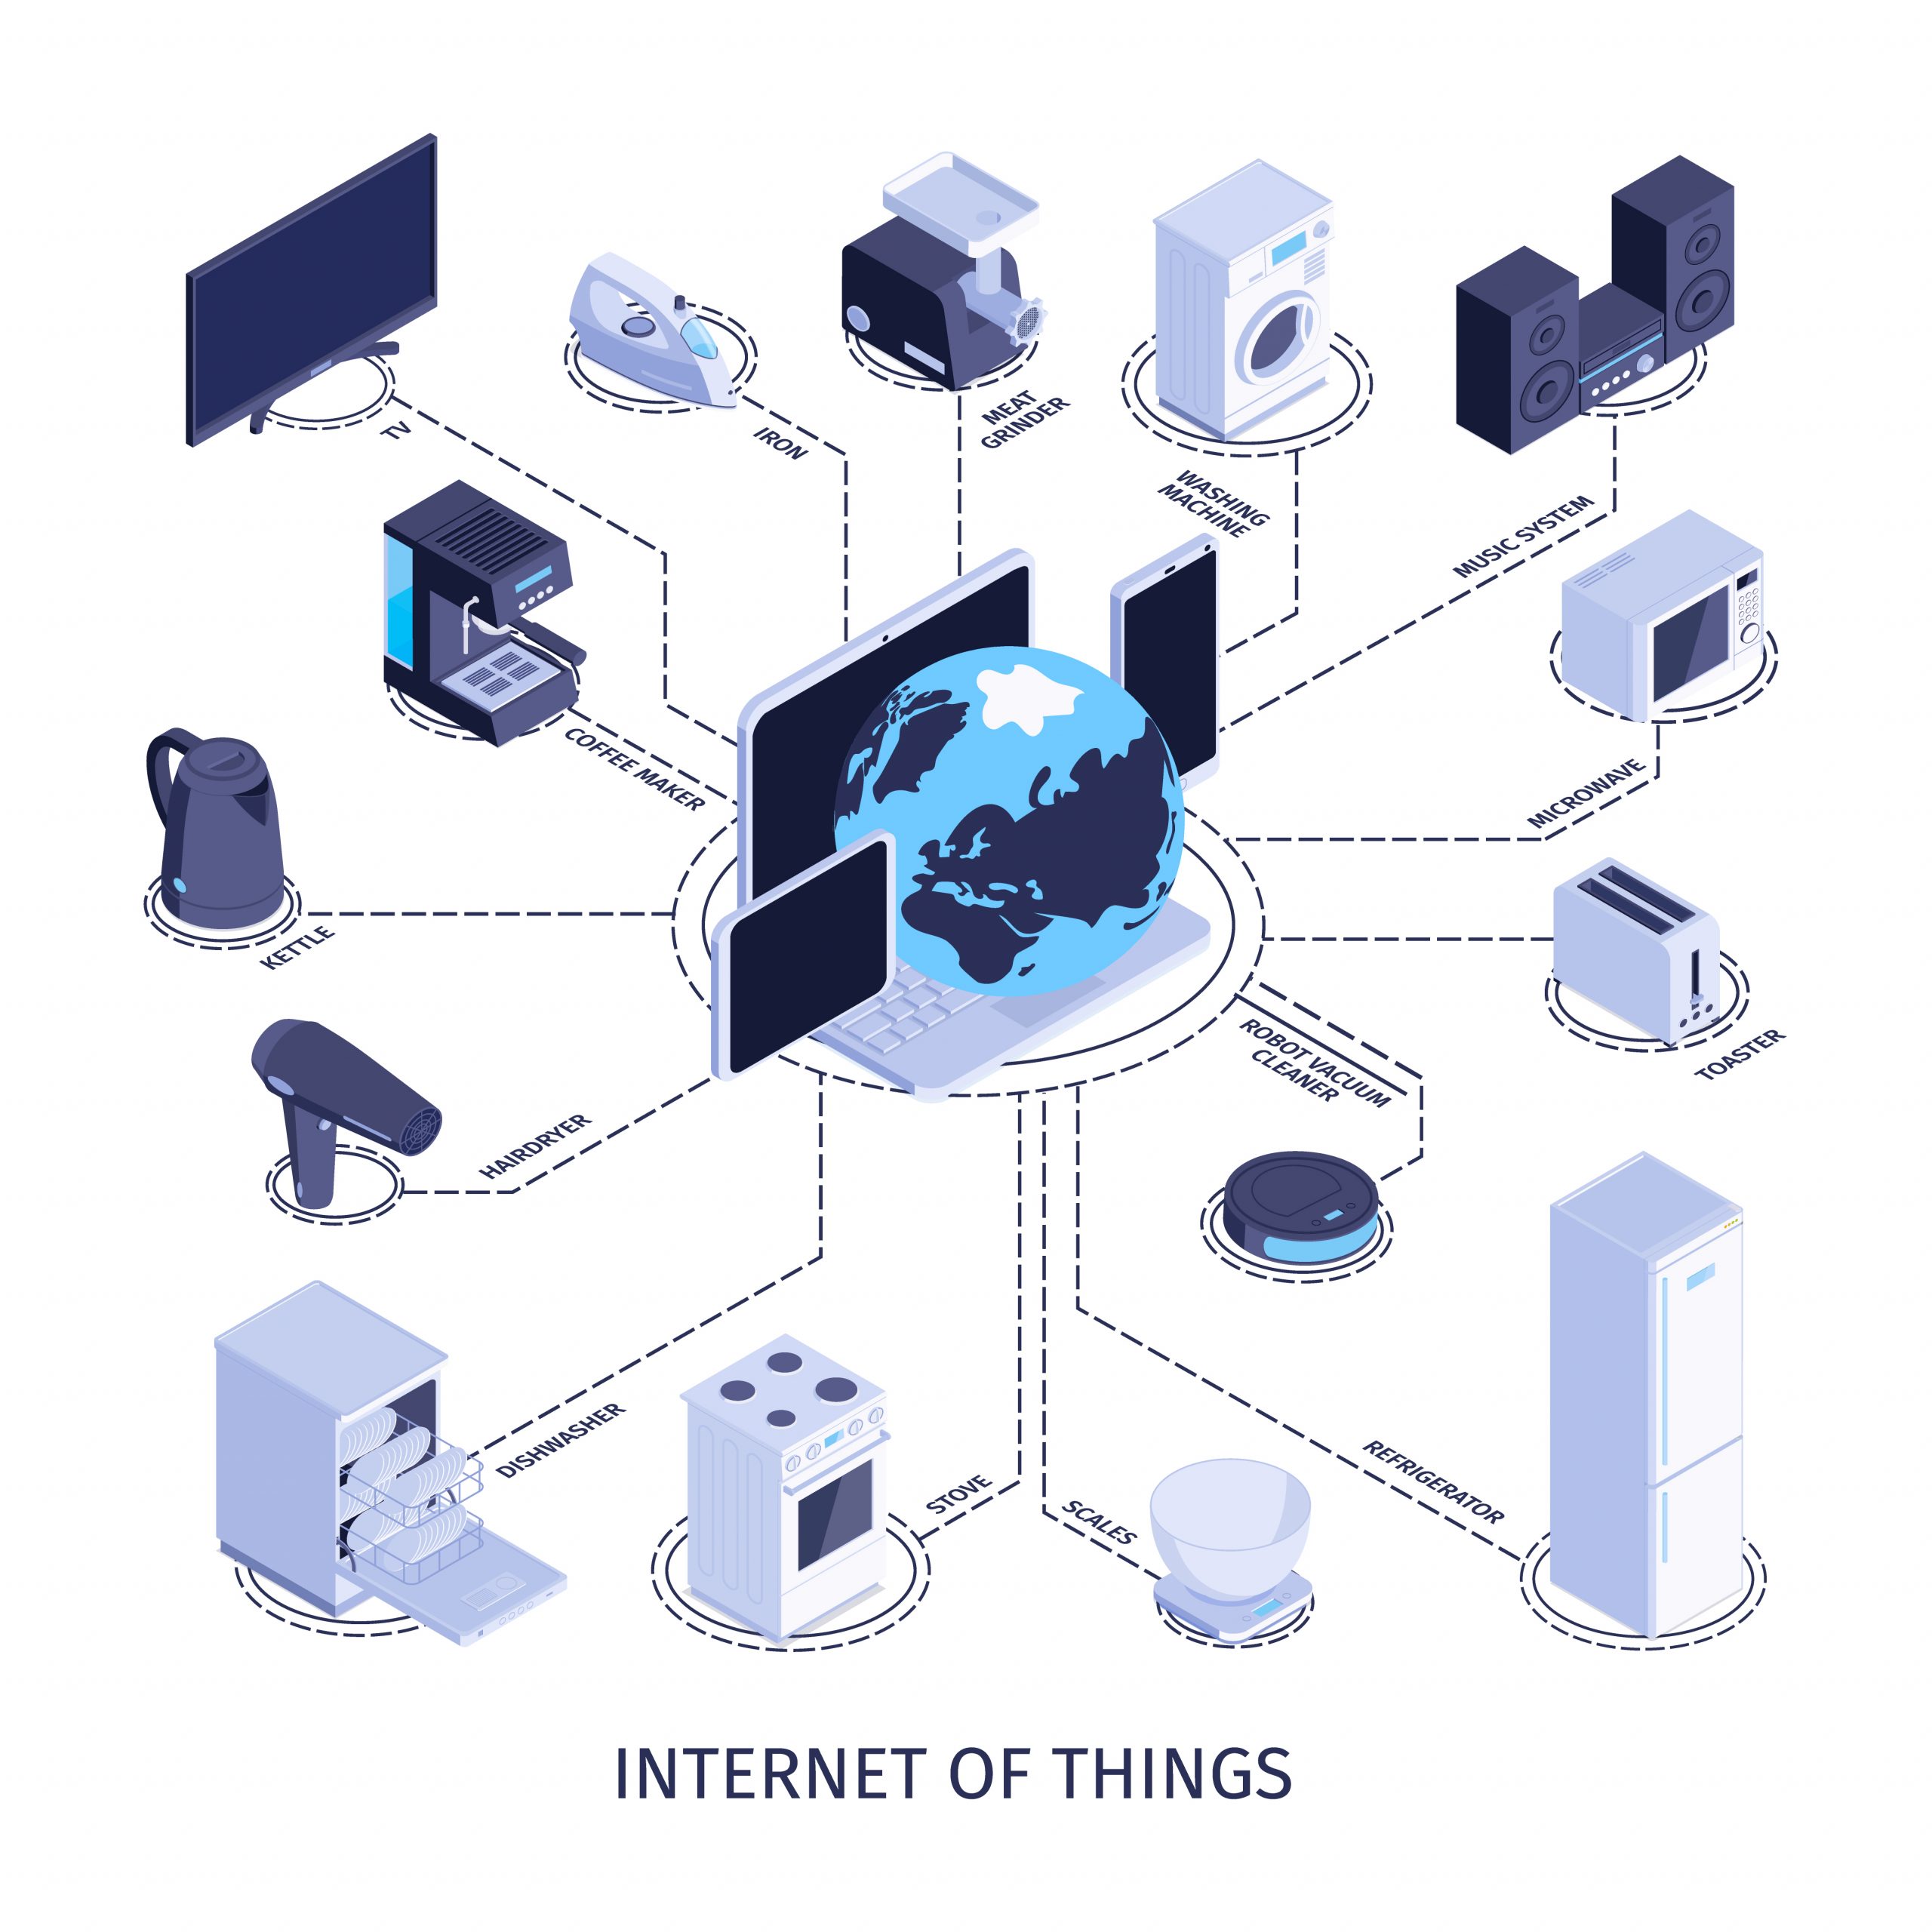 IoT is used in various home appliances